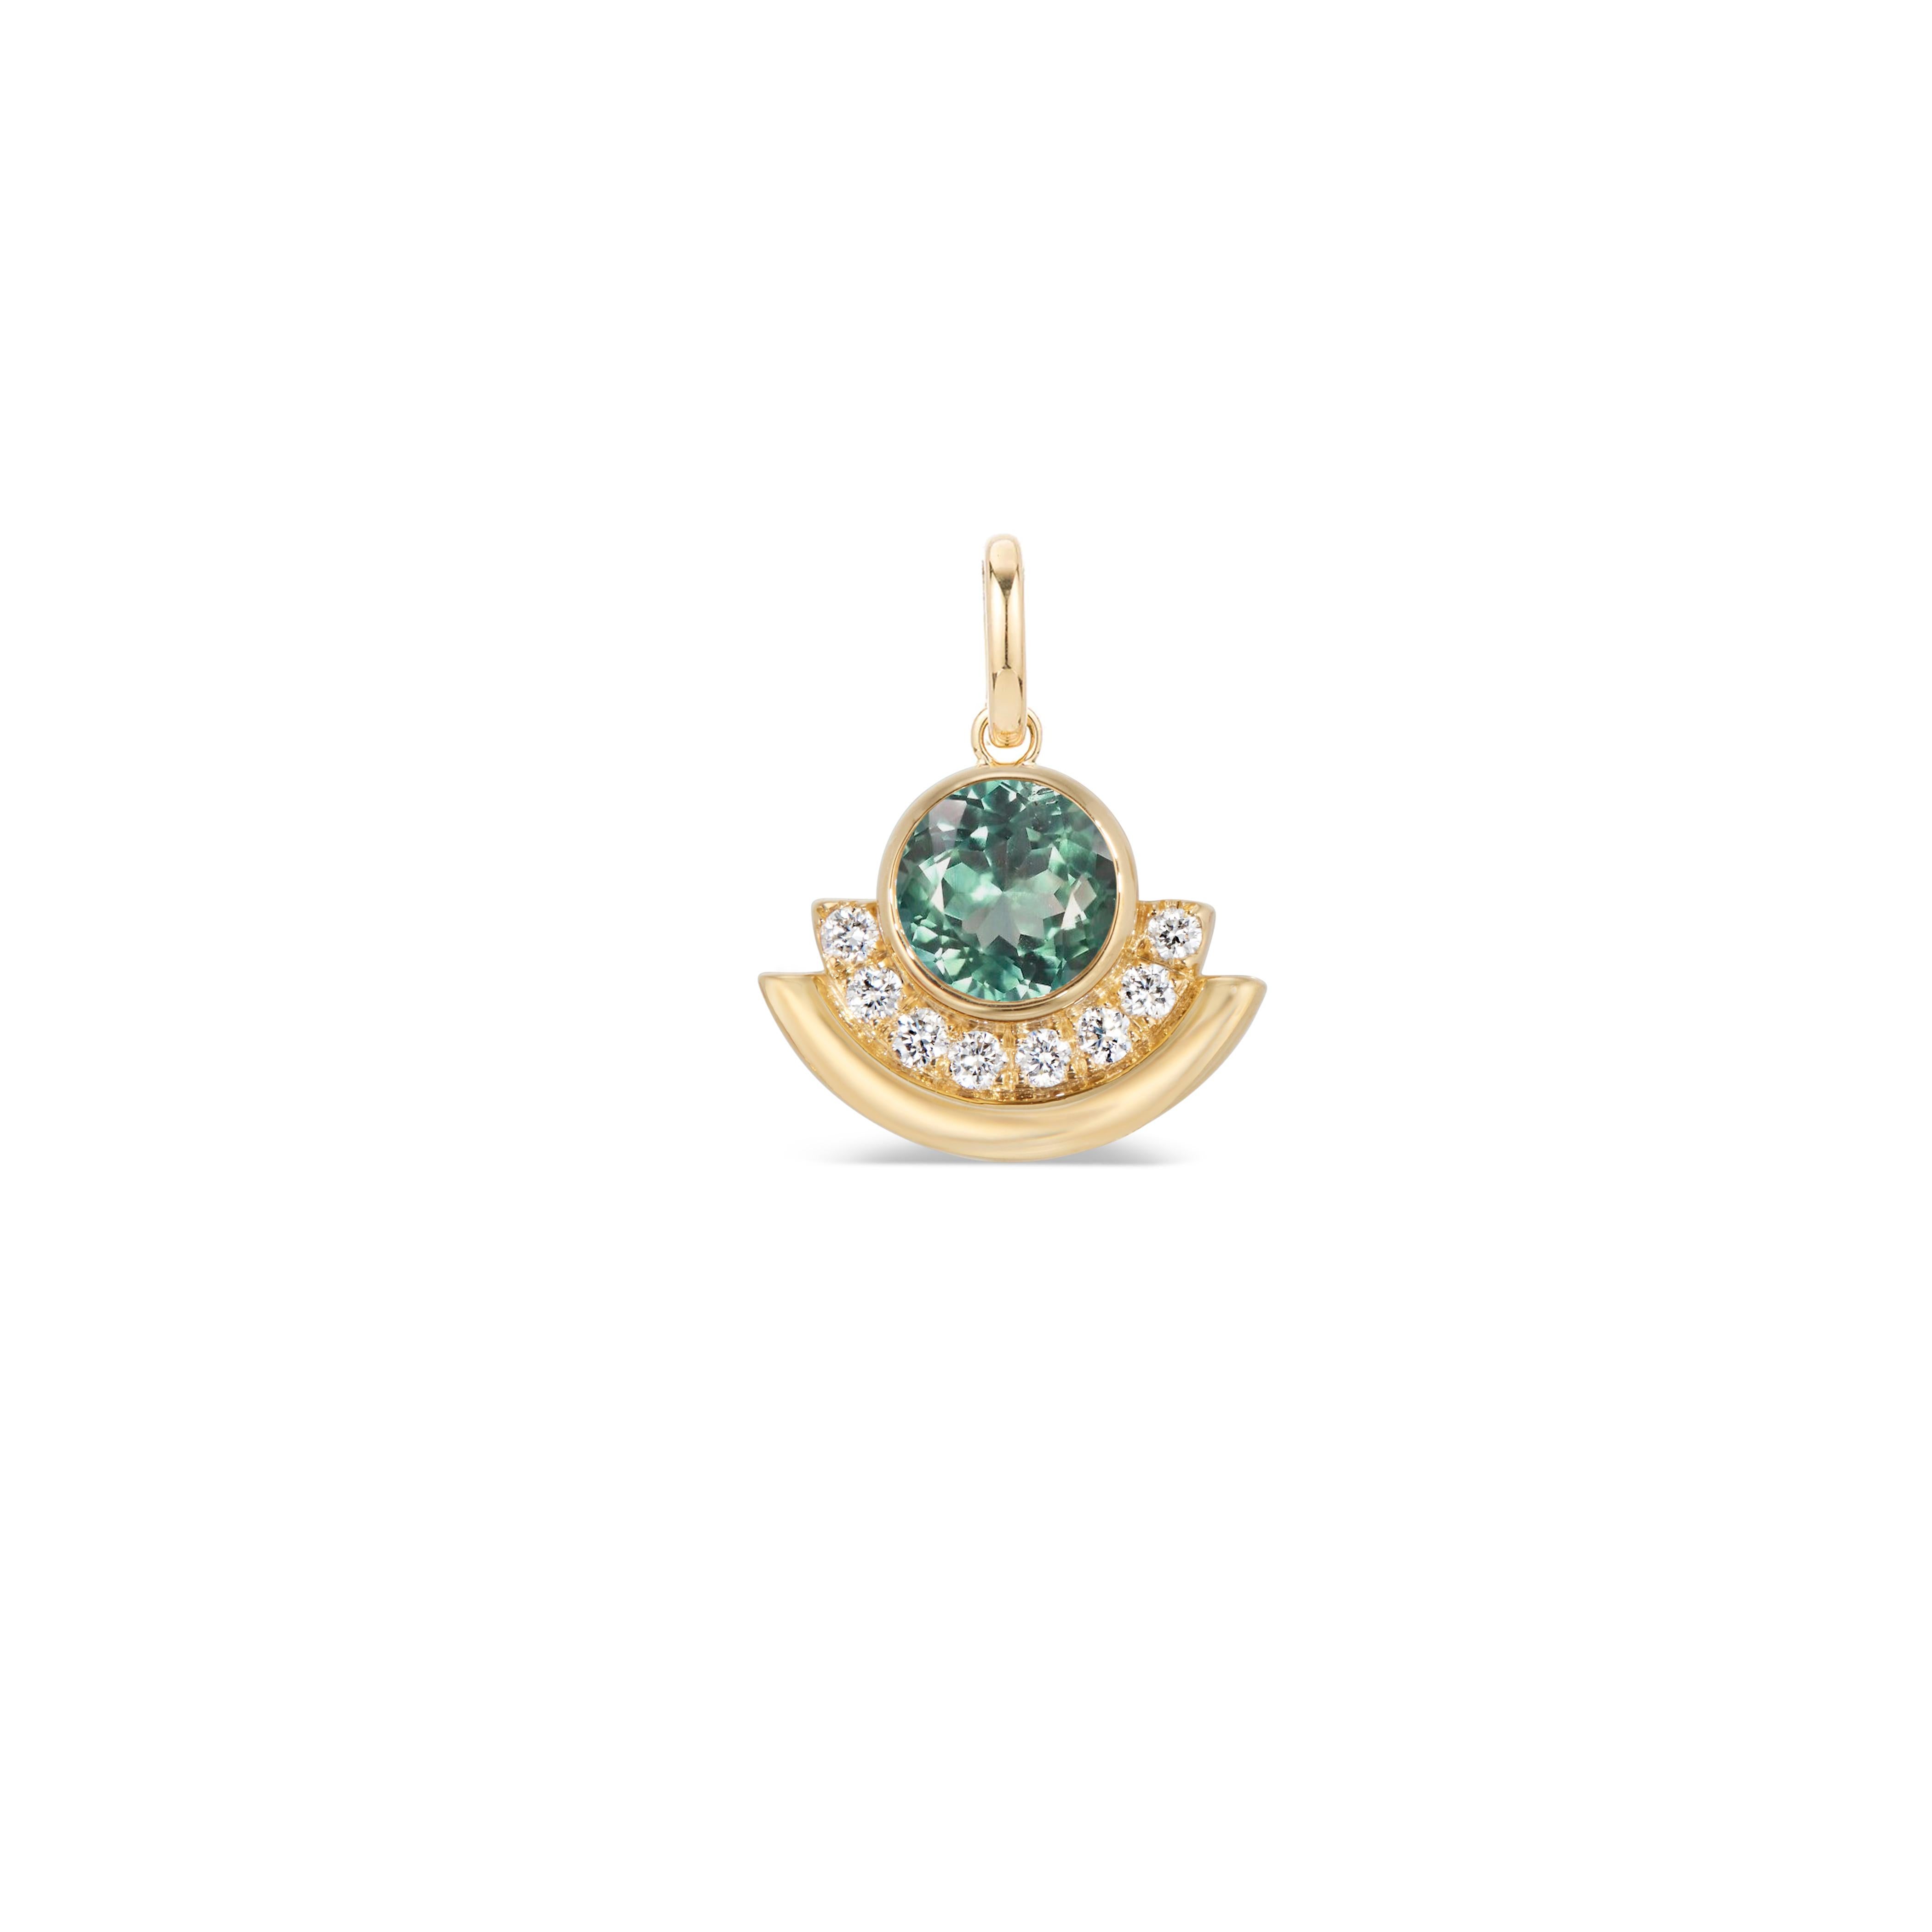 Contemporary Casey Perez Gold Arc Charm with Green Tourmaline and Diamonds For Sale